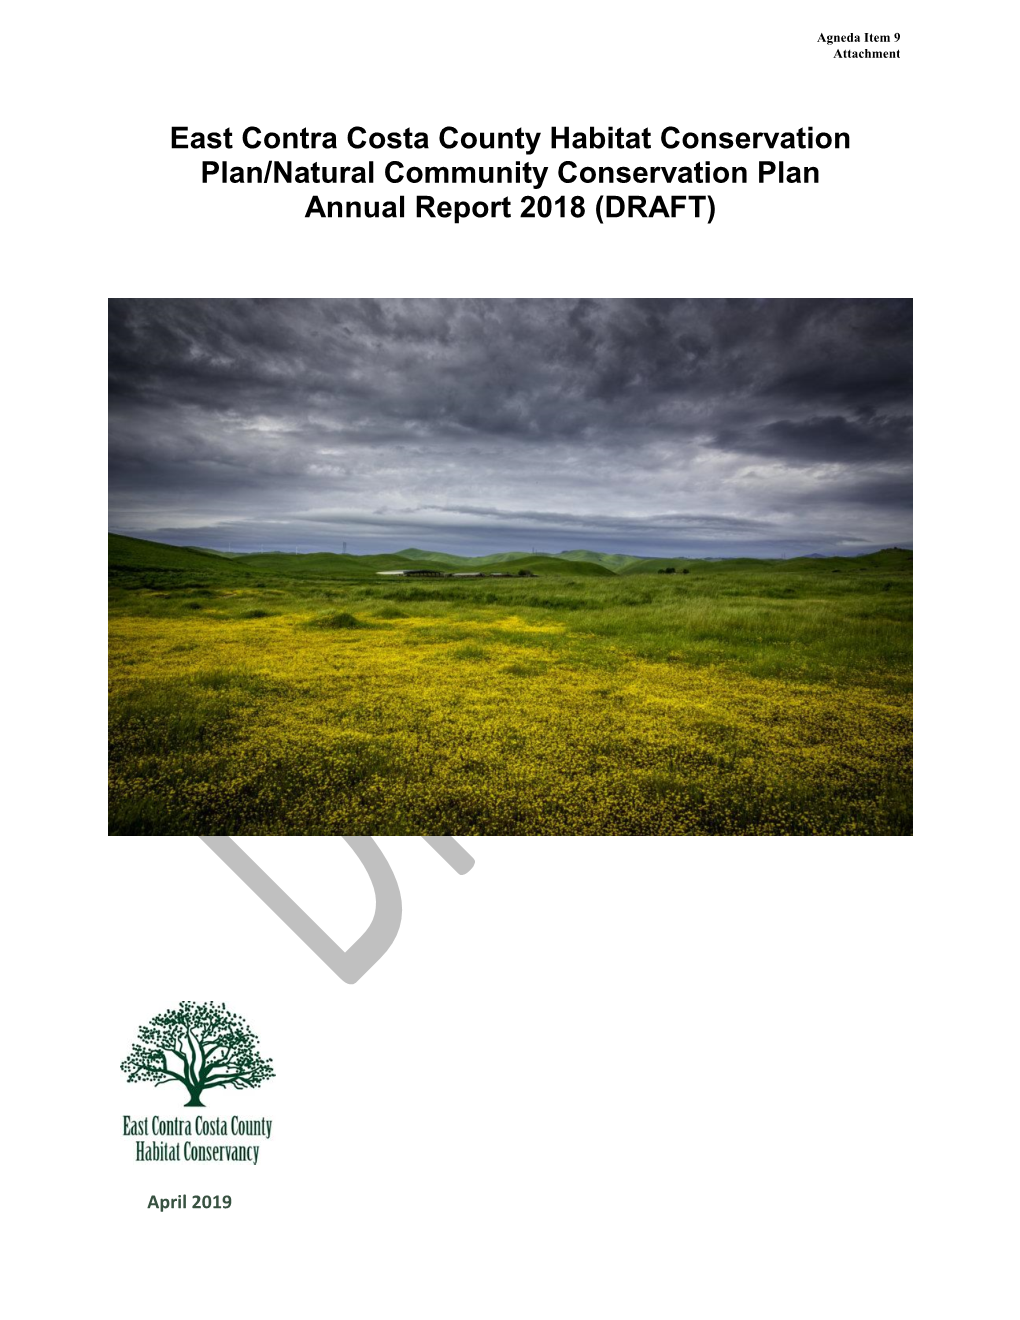 East Contra Costa County Habitat Conservation Plan/Natural Community Conservation Plan Annual Report 2018 (DRAFT)